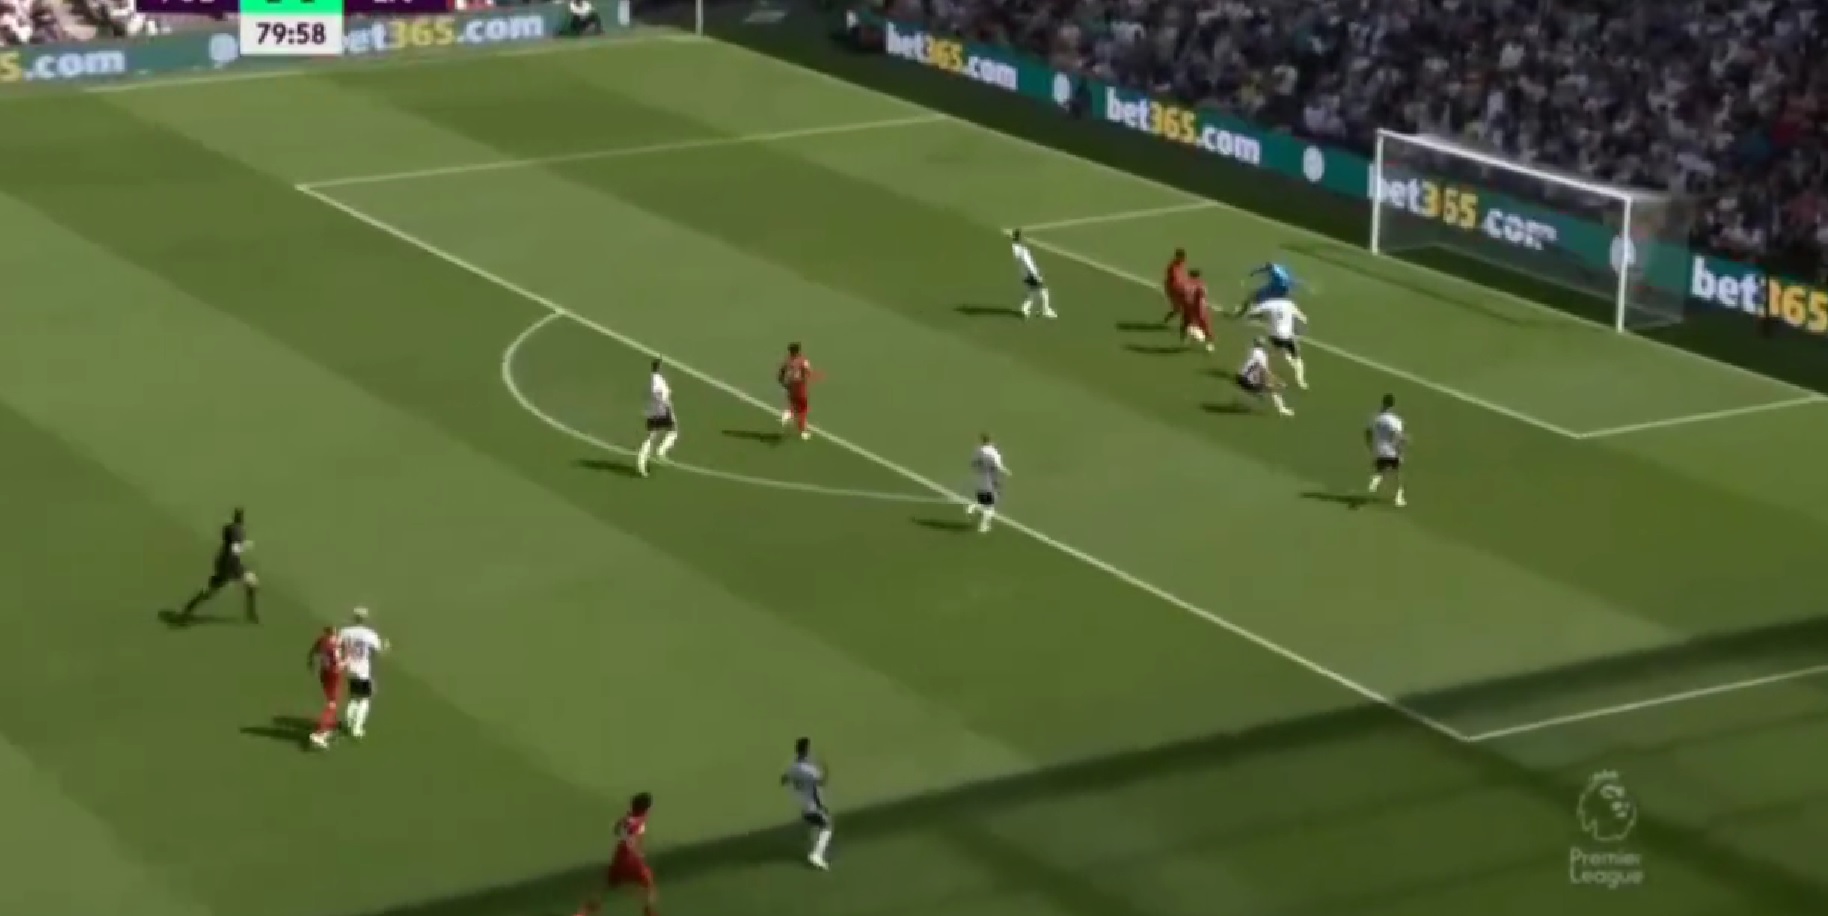 (Video) Mo Salah levels Liverpool from Nunez assist in thrilling opening league game